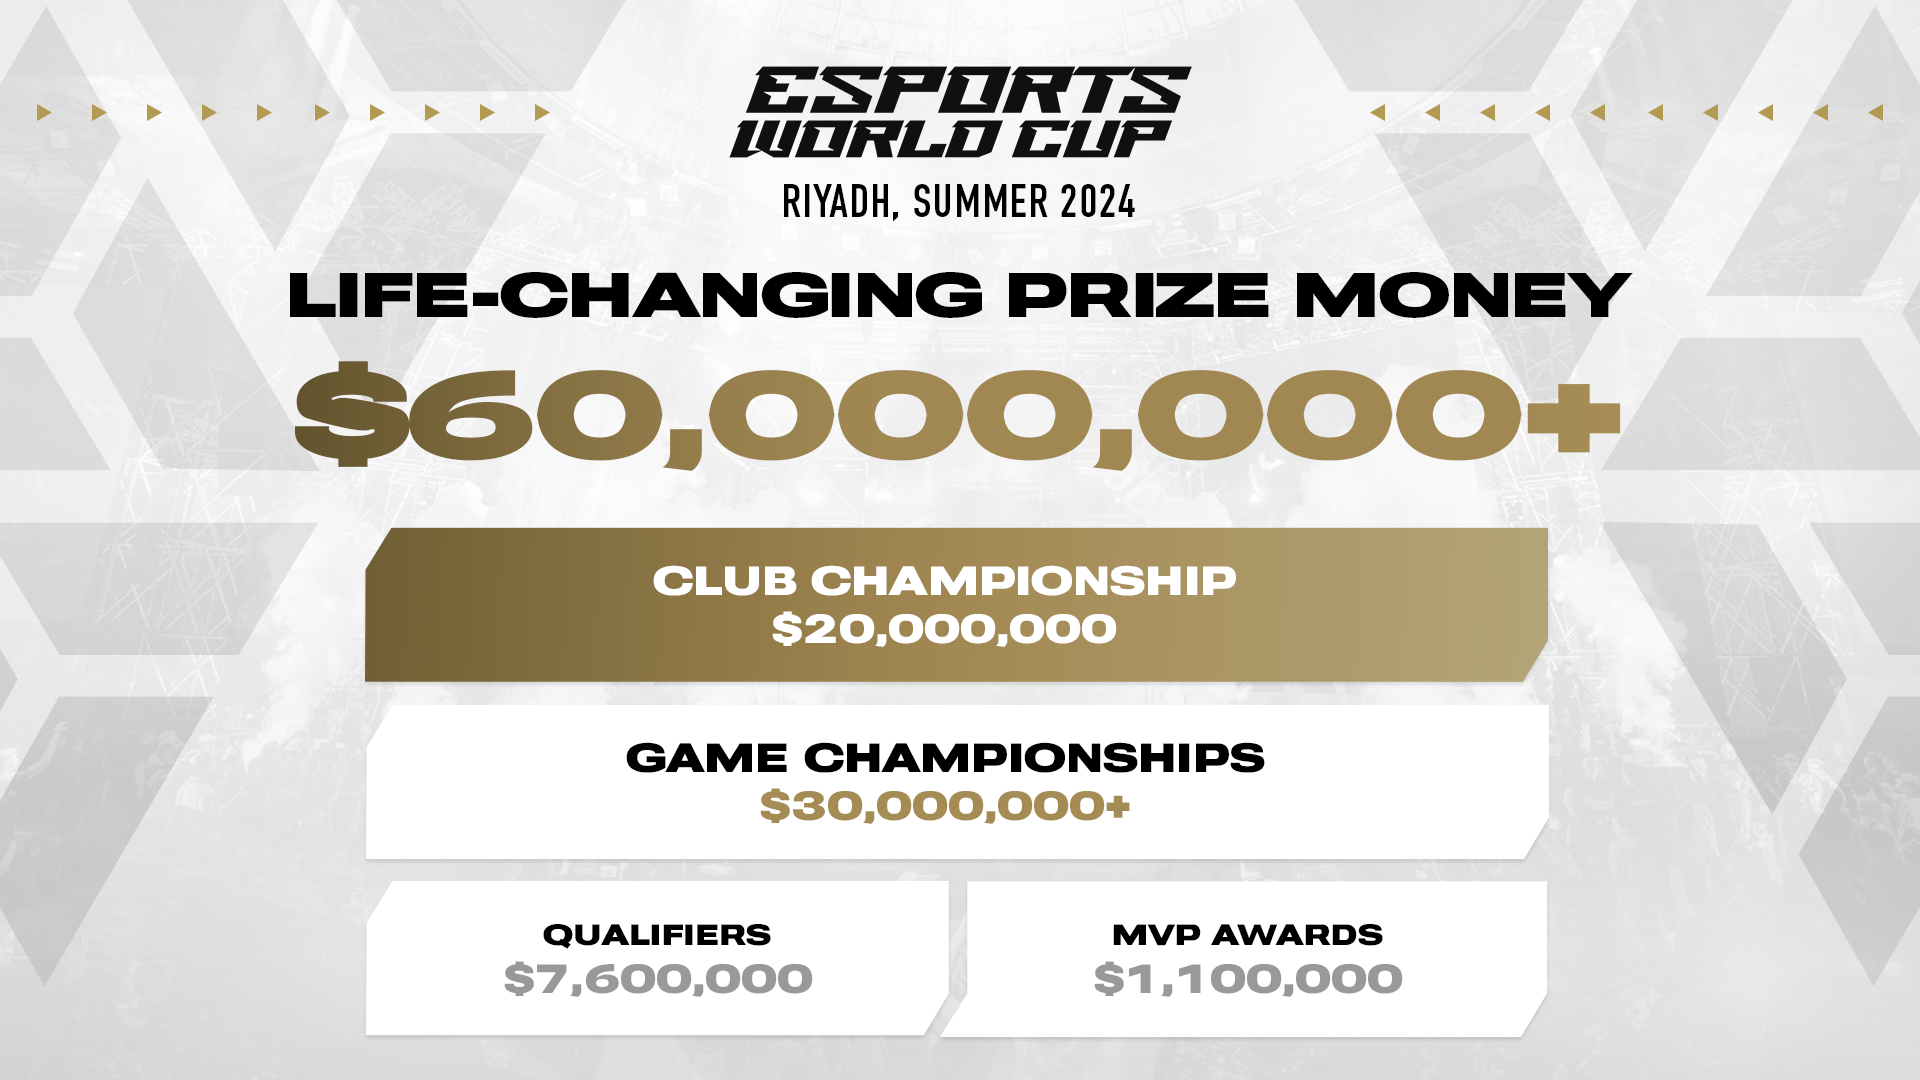 Prize Pool distribution at the Esports World Cup